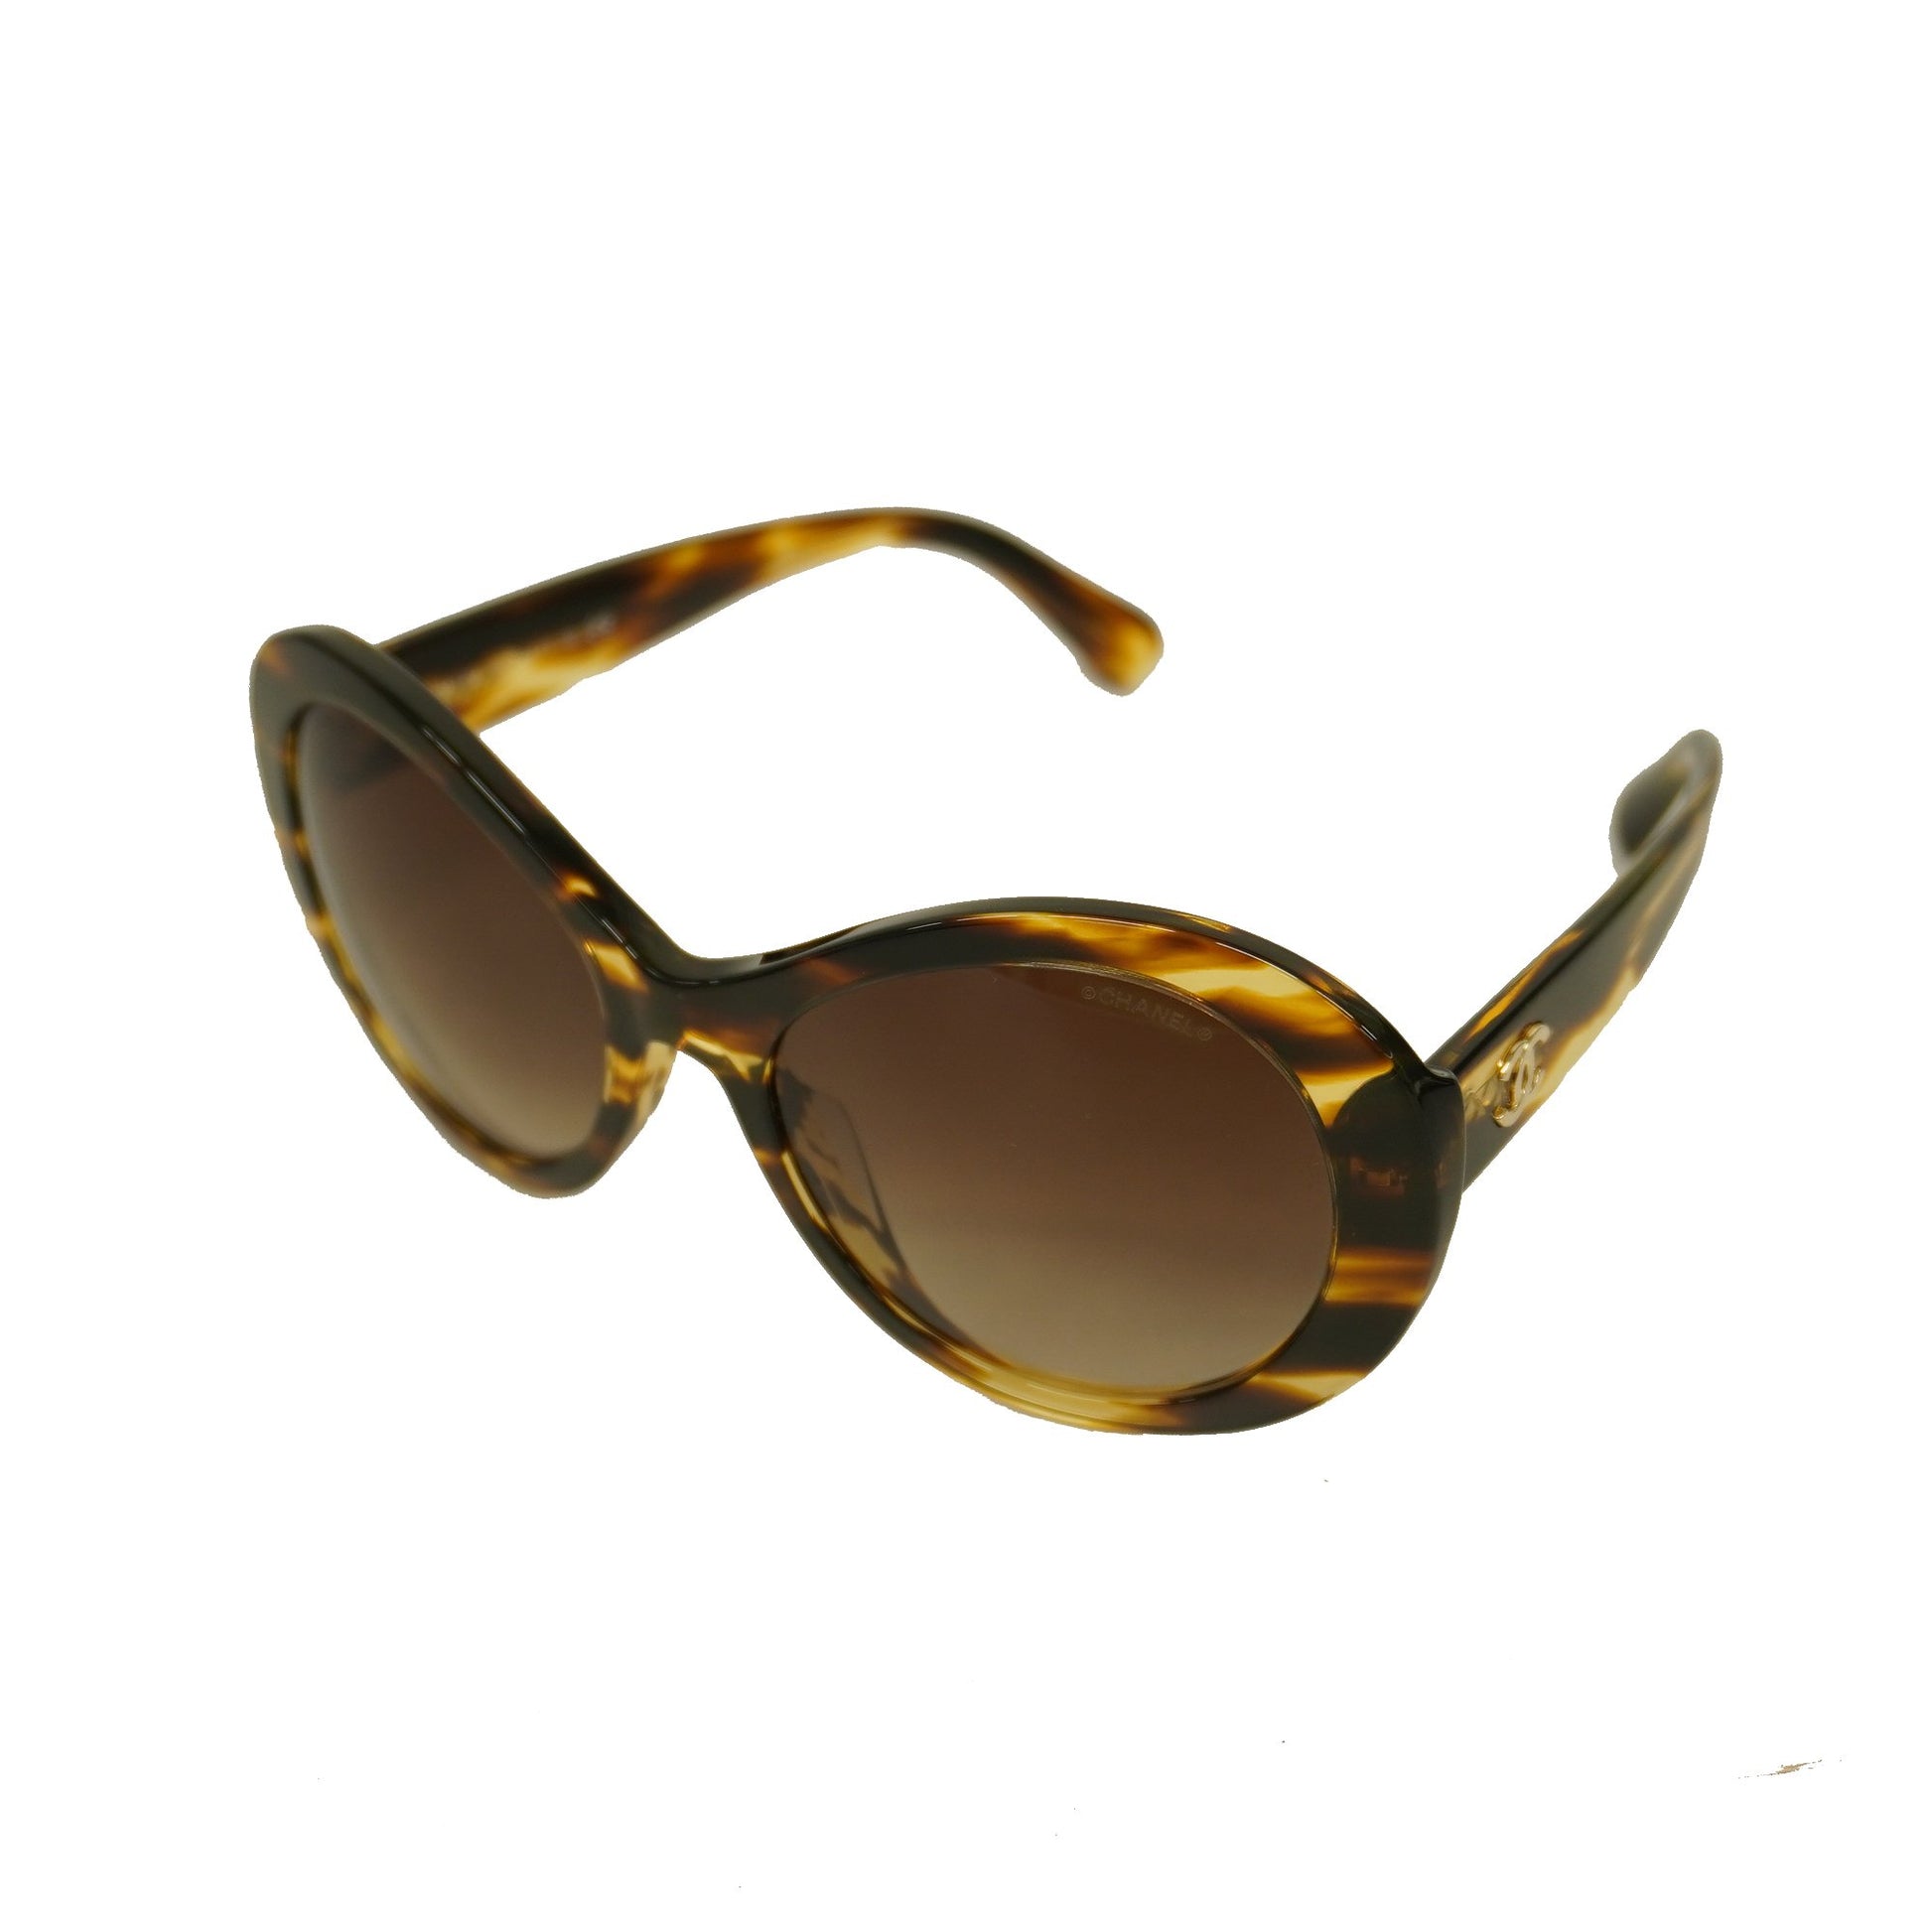 CHANELAuth Women's Brown Sunglasses gold hardware 5372-A